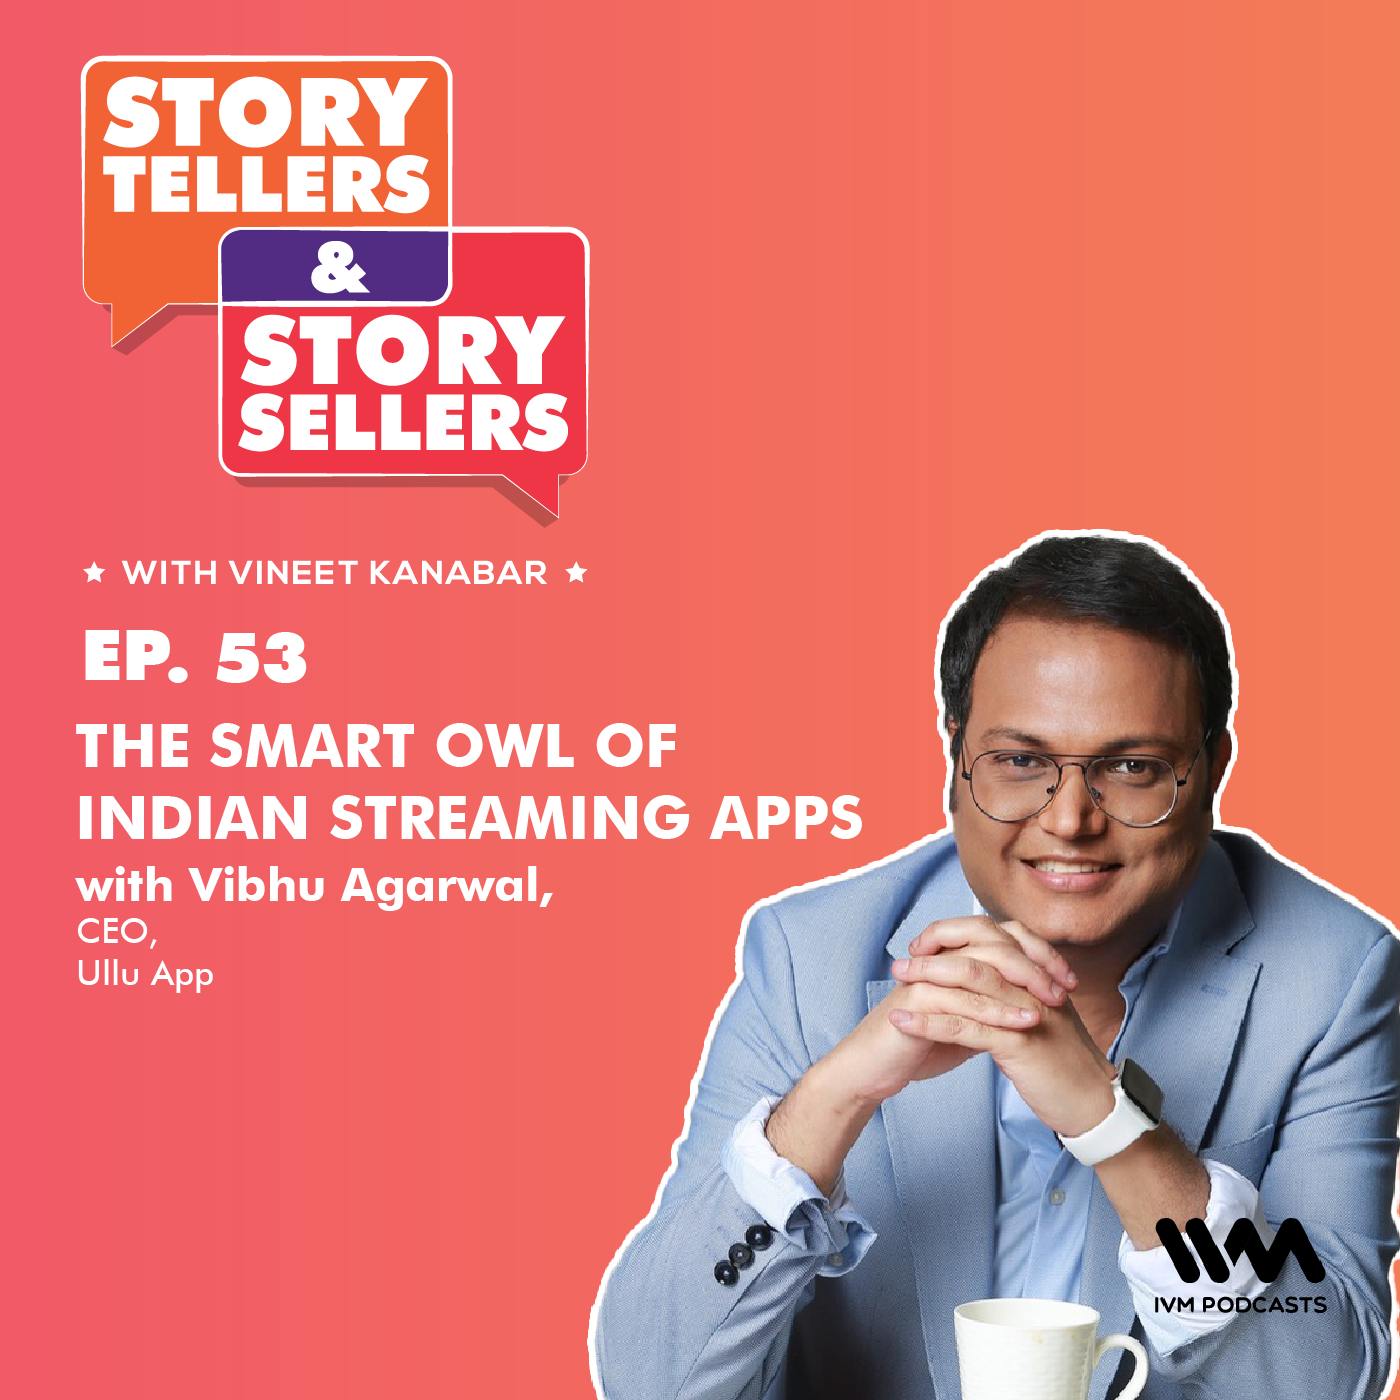 Vibhu Agarwal Discusses The Smart Owl of Indian Streaming Apps